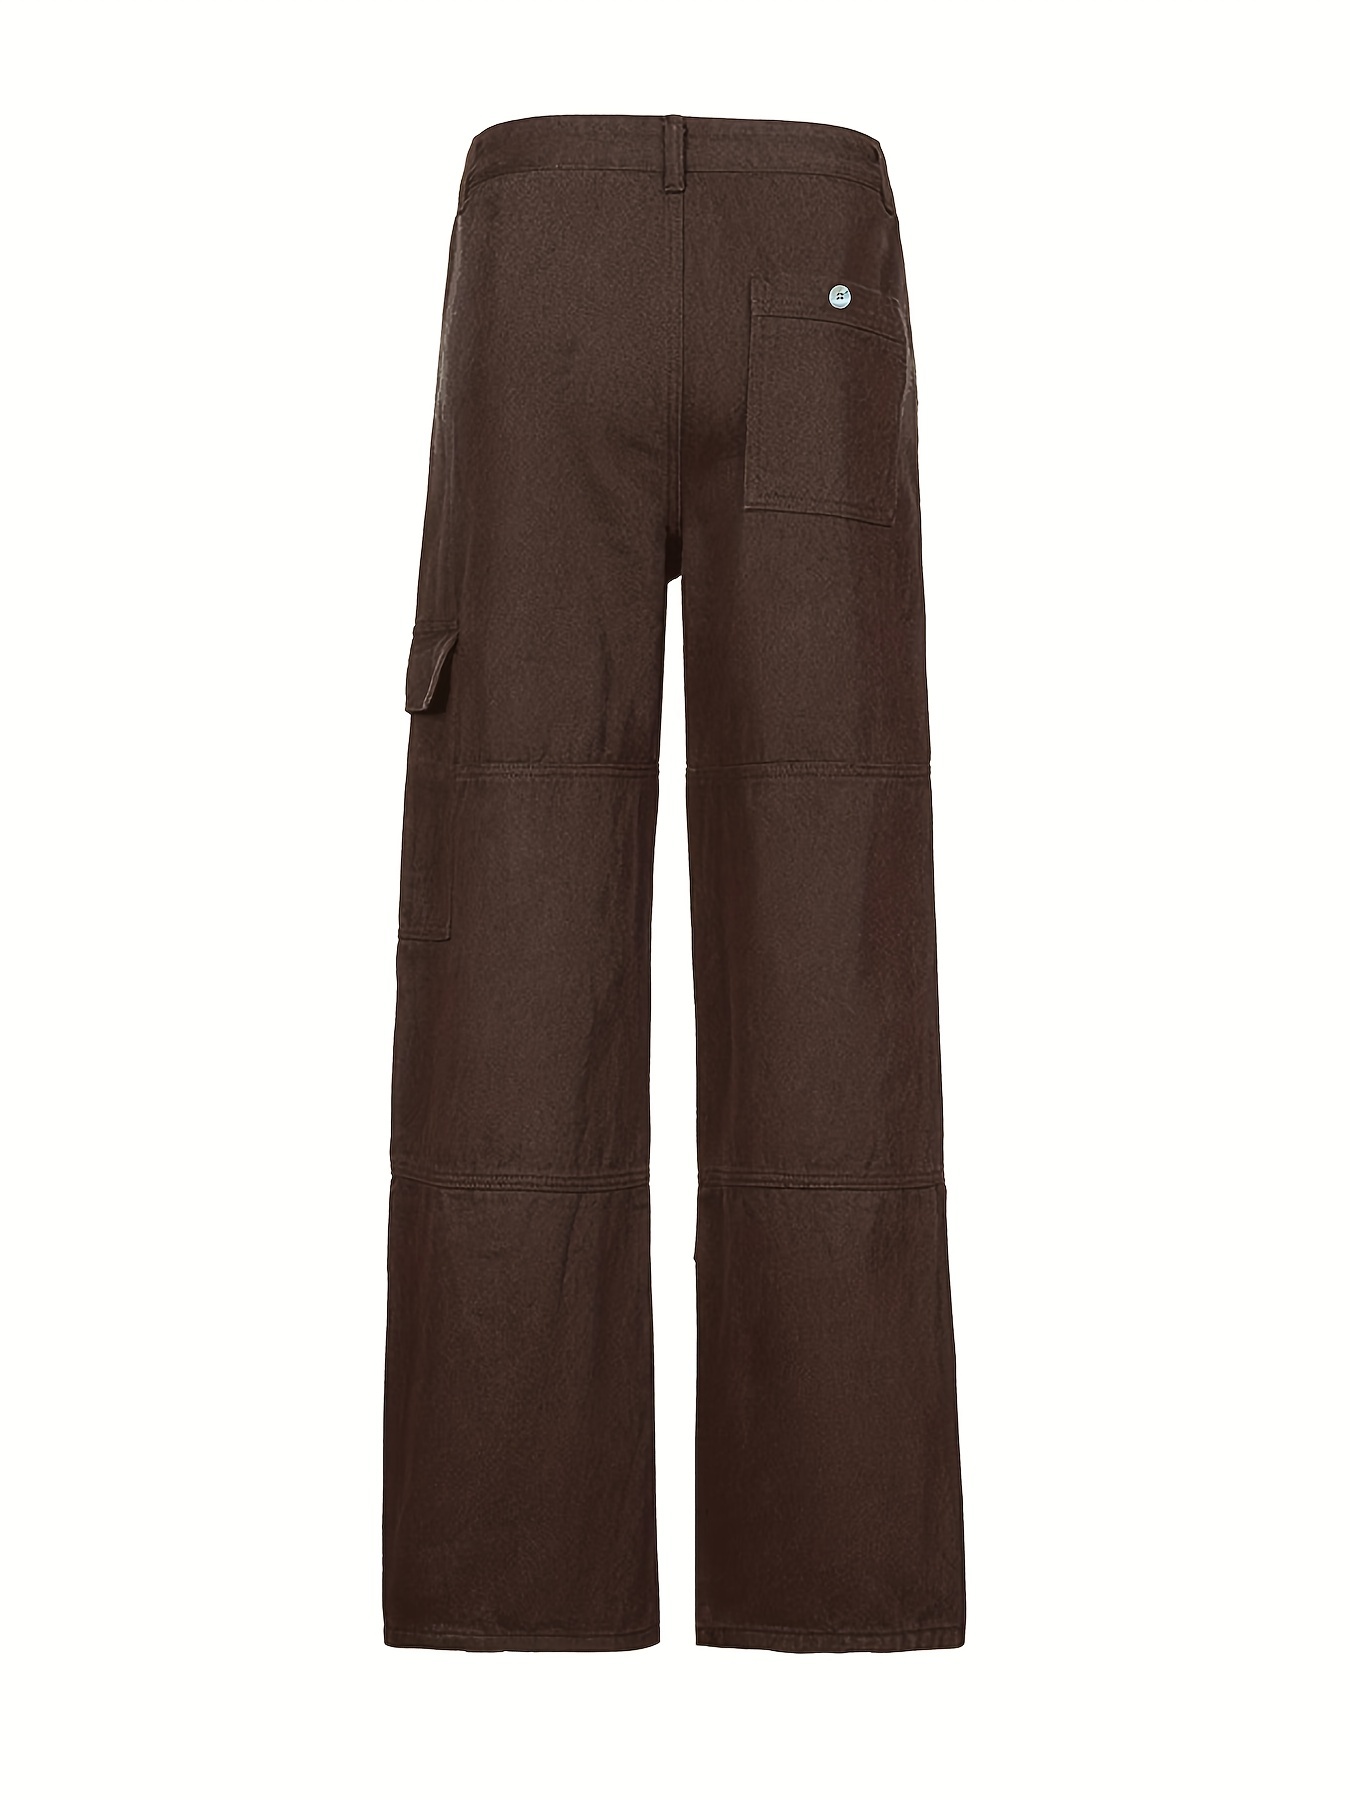 Vintage-Inspired Straight-Legged Pants for Couples - Loose and